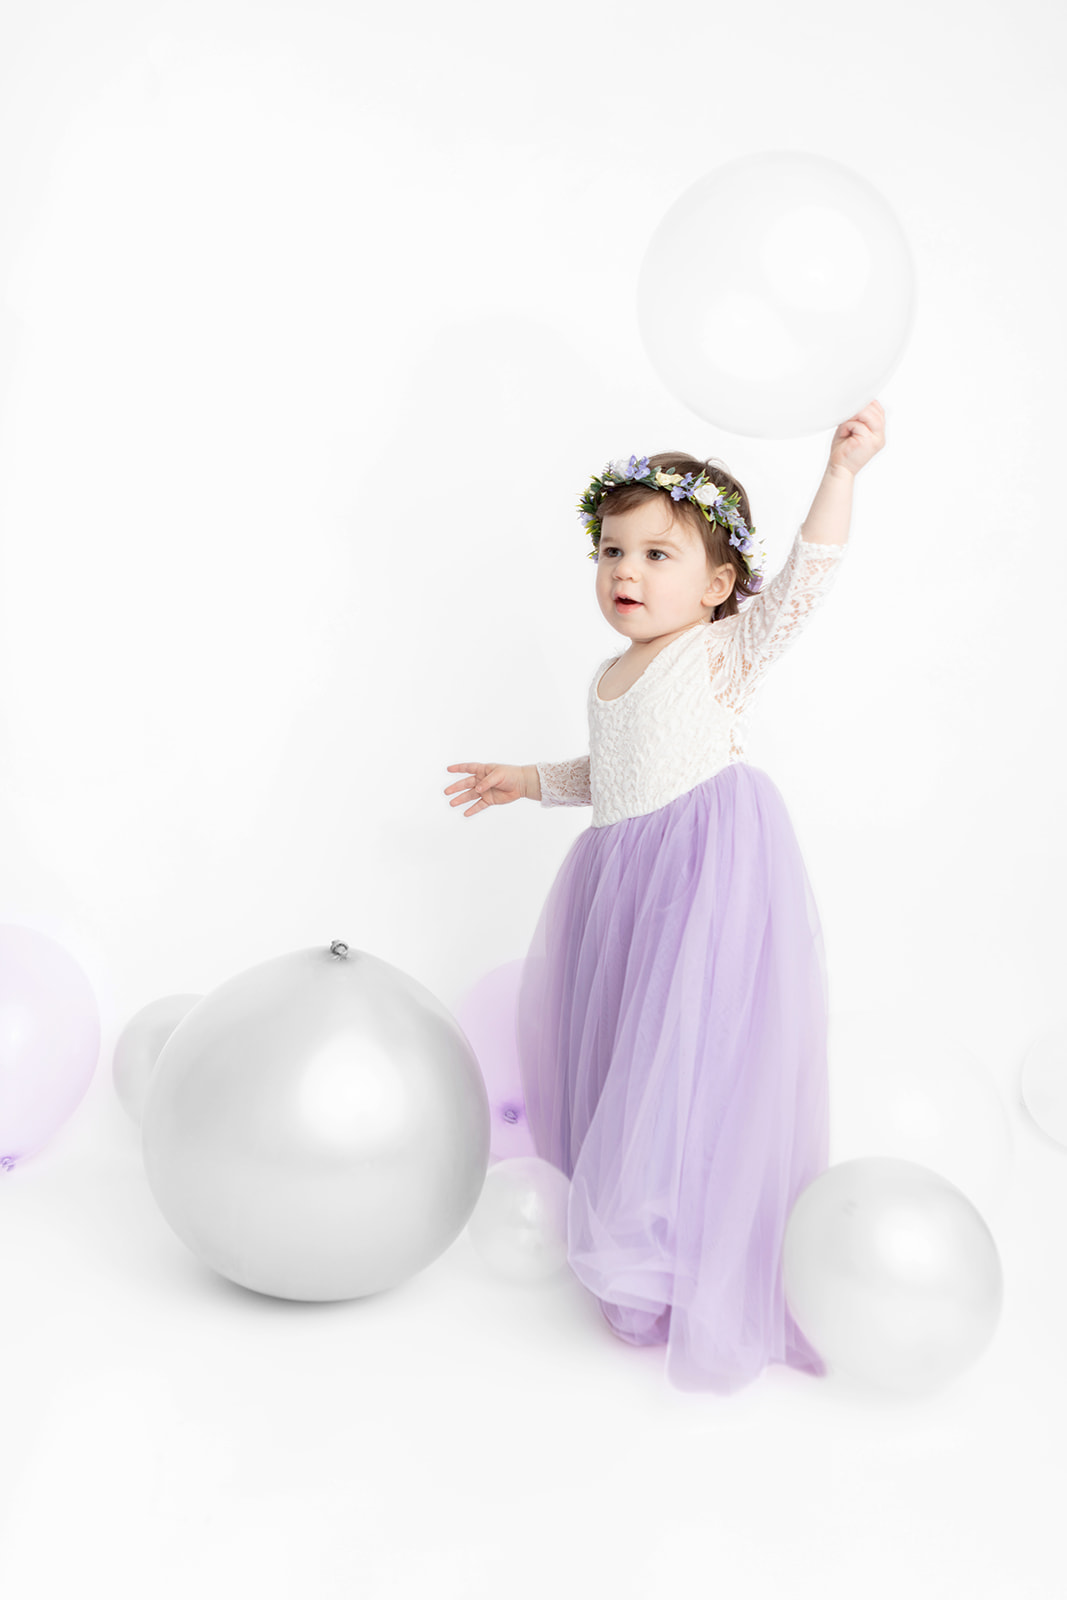 Two year-old Blake looks like a boho fairy princess in her ivory lace and lavender tulle gown. A white and purple flower crown adorns her head as she victoriously lifts a white baloon above her head. Silver, clear, and light purple balloons add depth to the photograph, captured at the Looking Up Photography studio in Greenwich, Connecticut.